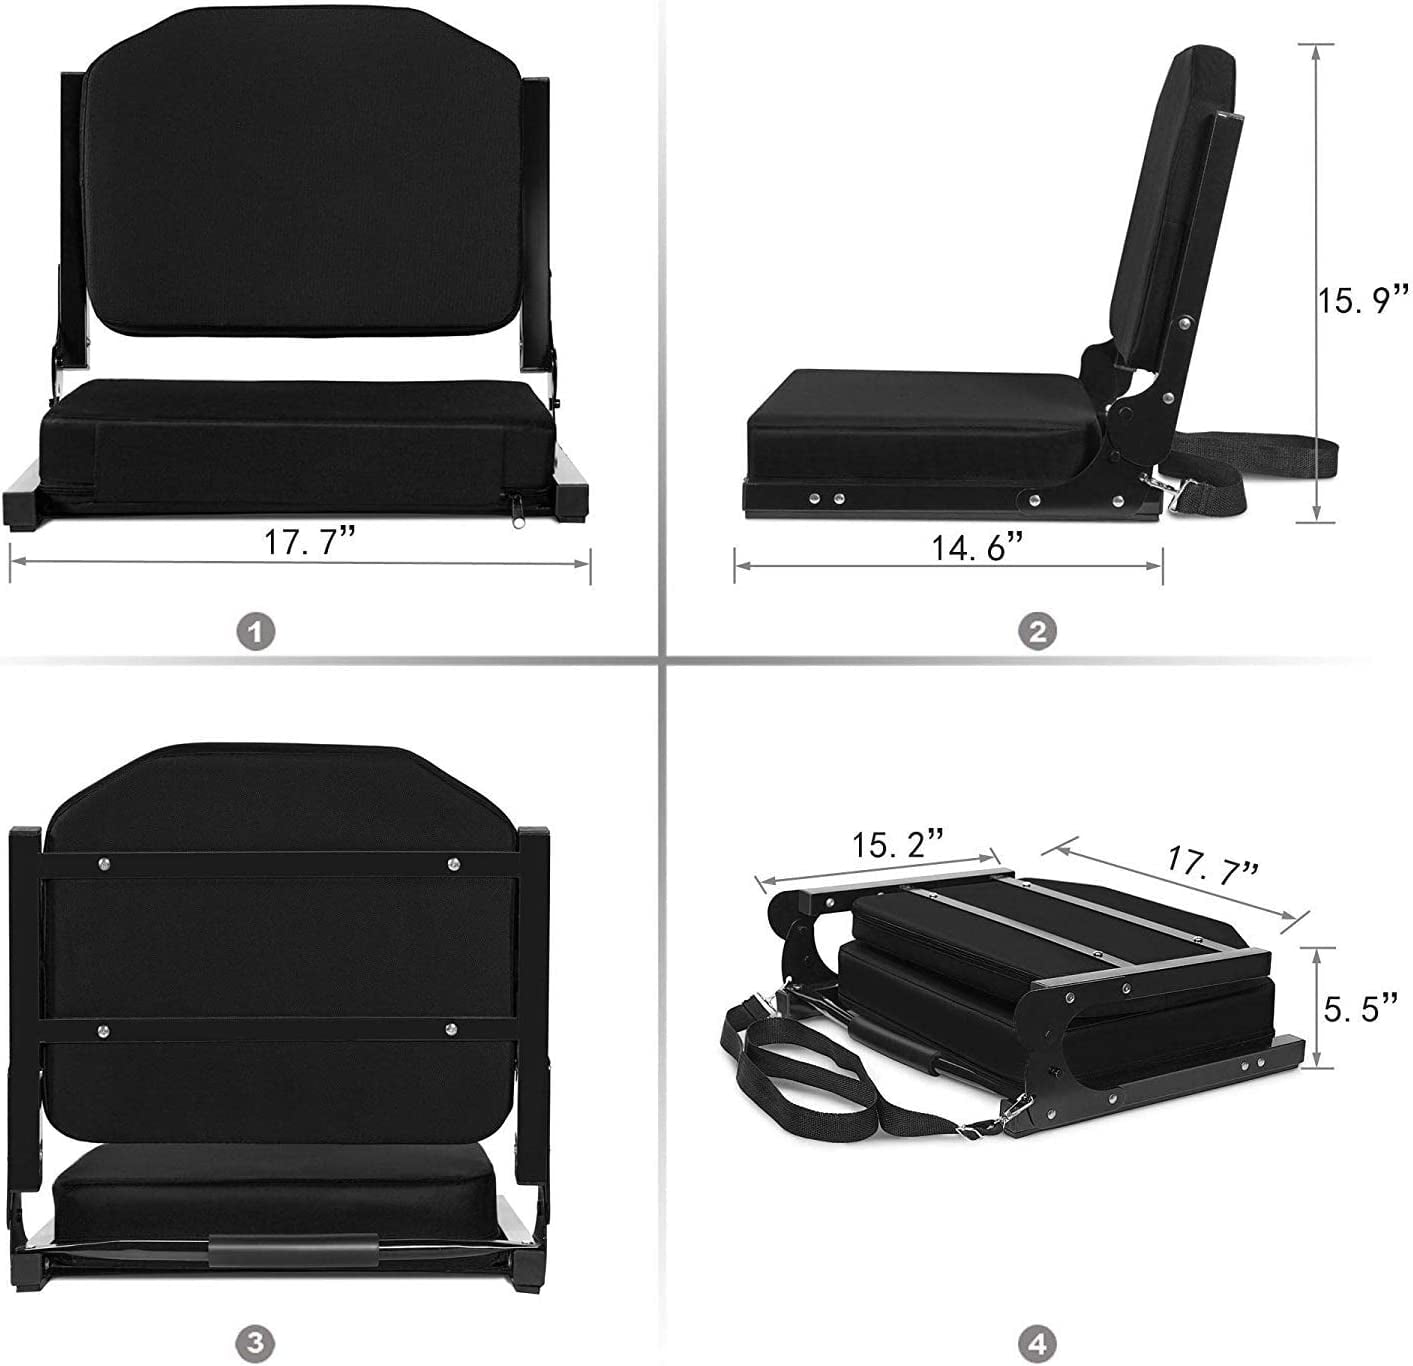 Stadium Seats For Bleachers With Back And Cushion Support, Wide Padded  Portable Stadium Seats Chairs With Backs And Shoulder Strap